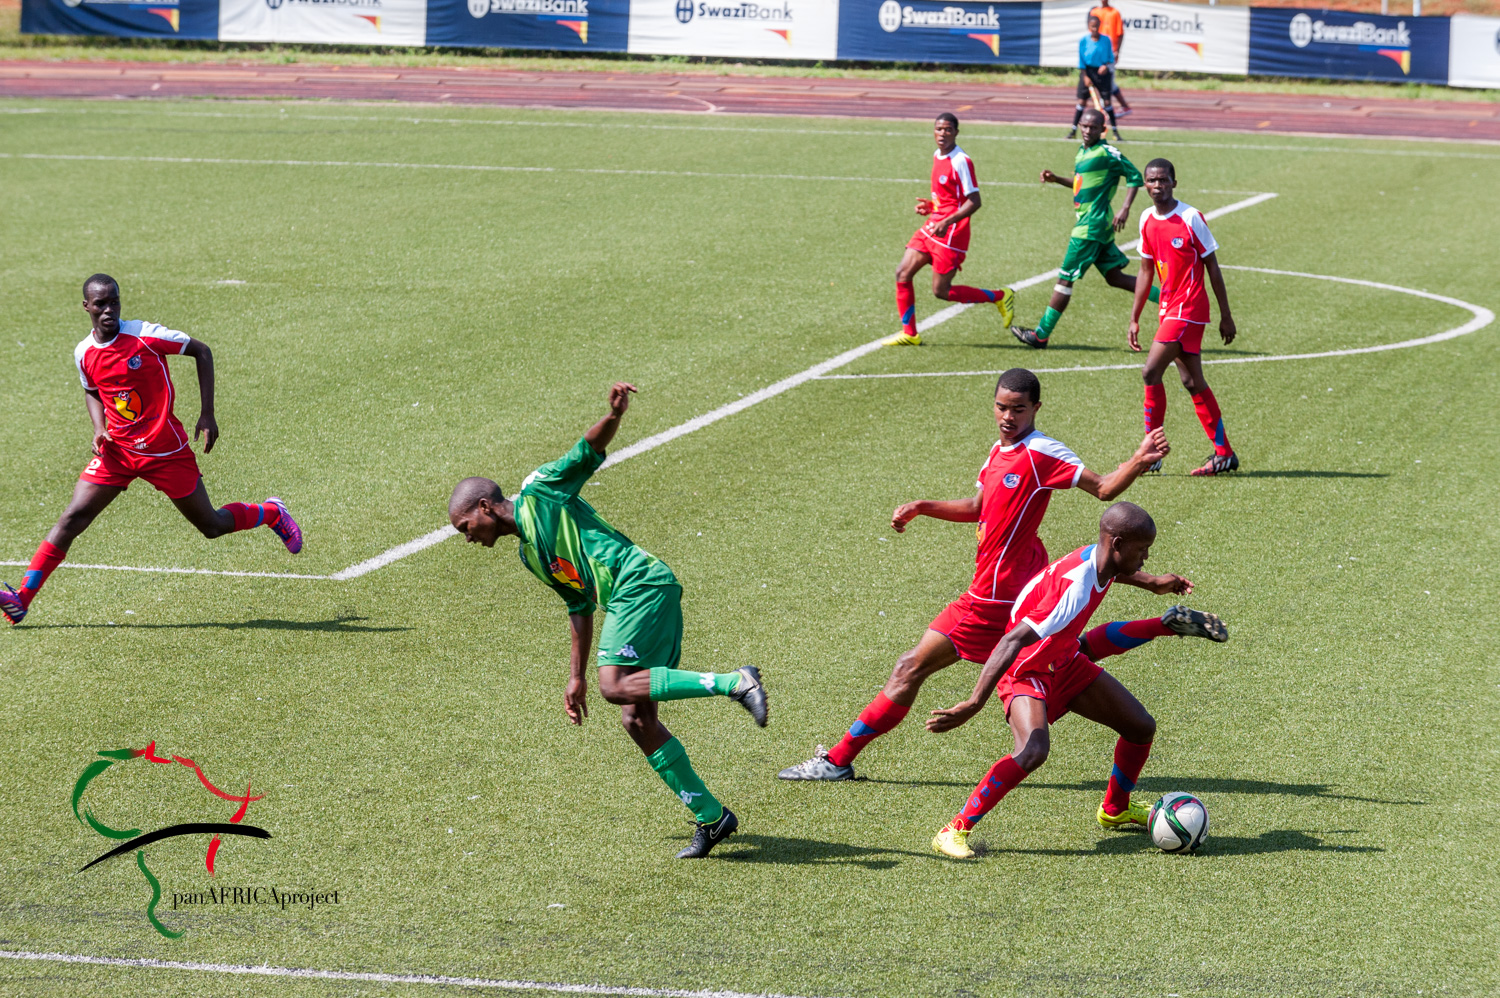 Athletes playing in a soccer match